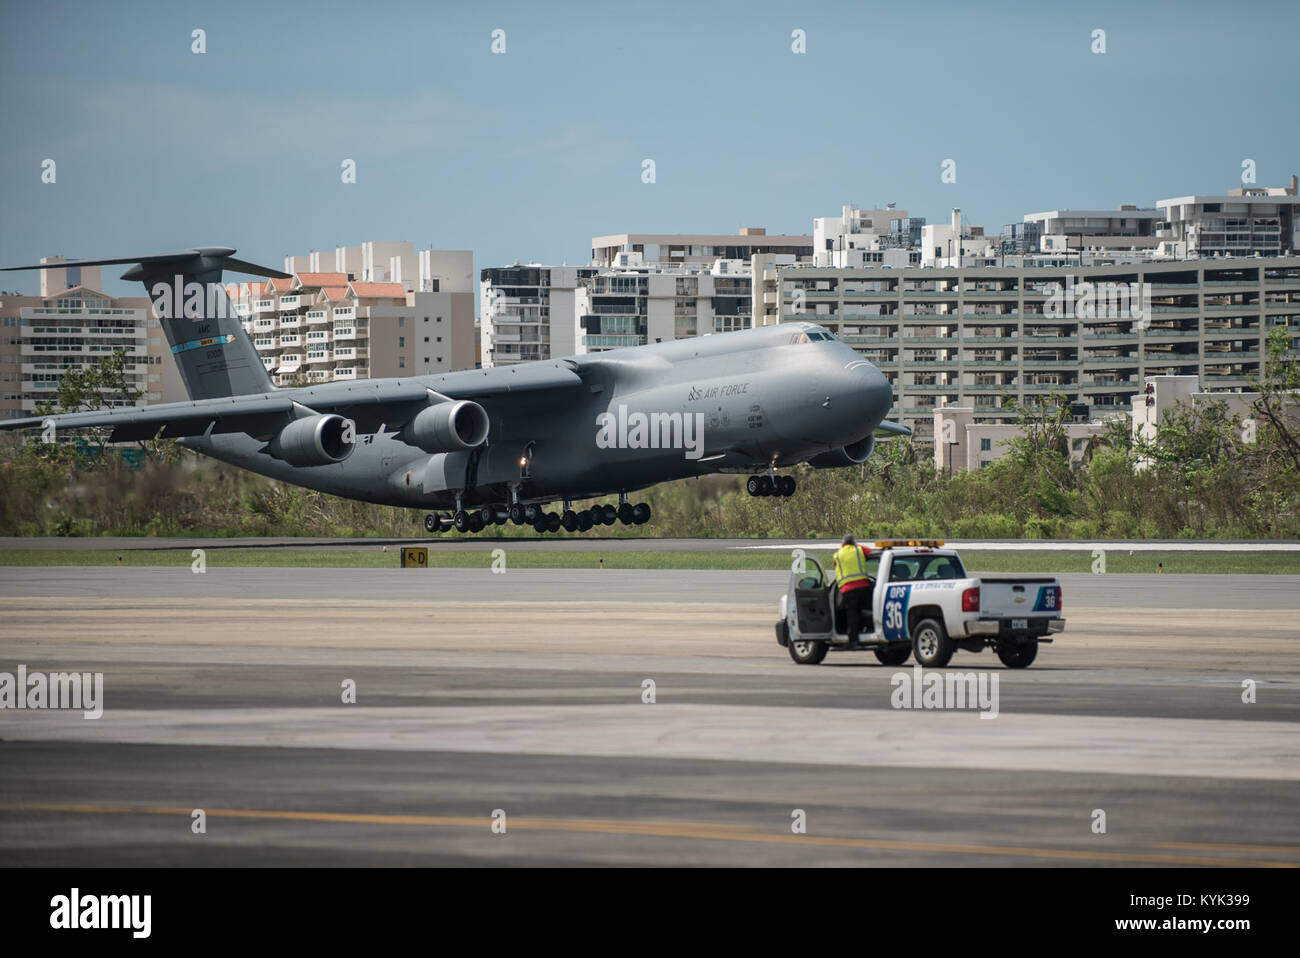 A U.S. Air Force C-5 Galaxy loaded with humanitarian aid lands at Luis Muñoz Marín International Airport in San Juan on Oct. 5, 2017. The cargo will be downloaded and staged for distribution by Airmen from the Kentucky Air Guard’s 123rd Contingency Response Group as part of Hurricane Maria recovery efforts. (U.S. Air National Guard photo by Lt. Col. Dale Greer) Stock Photo